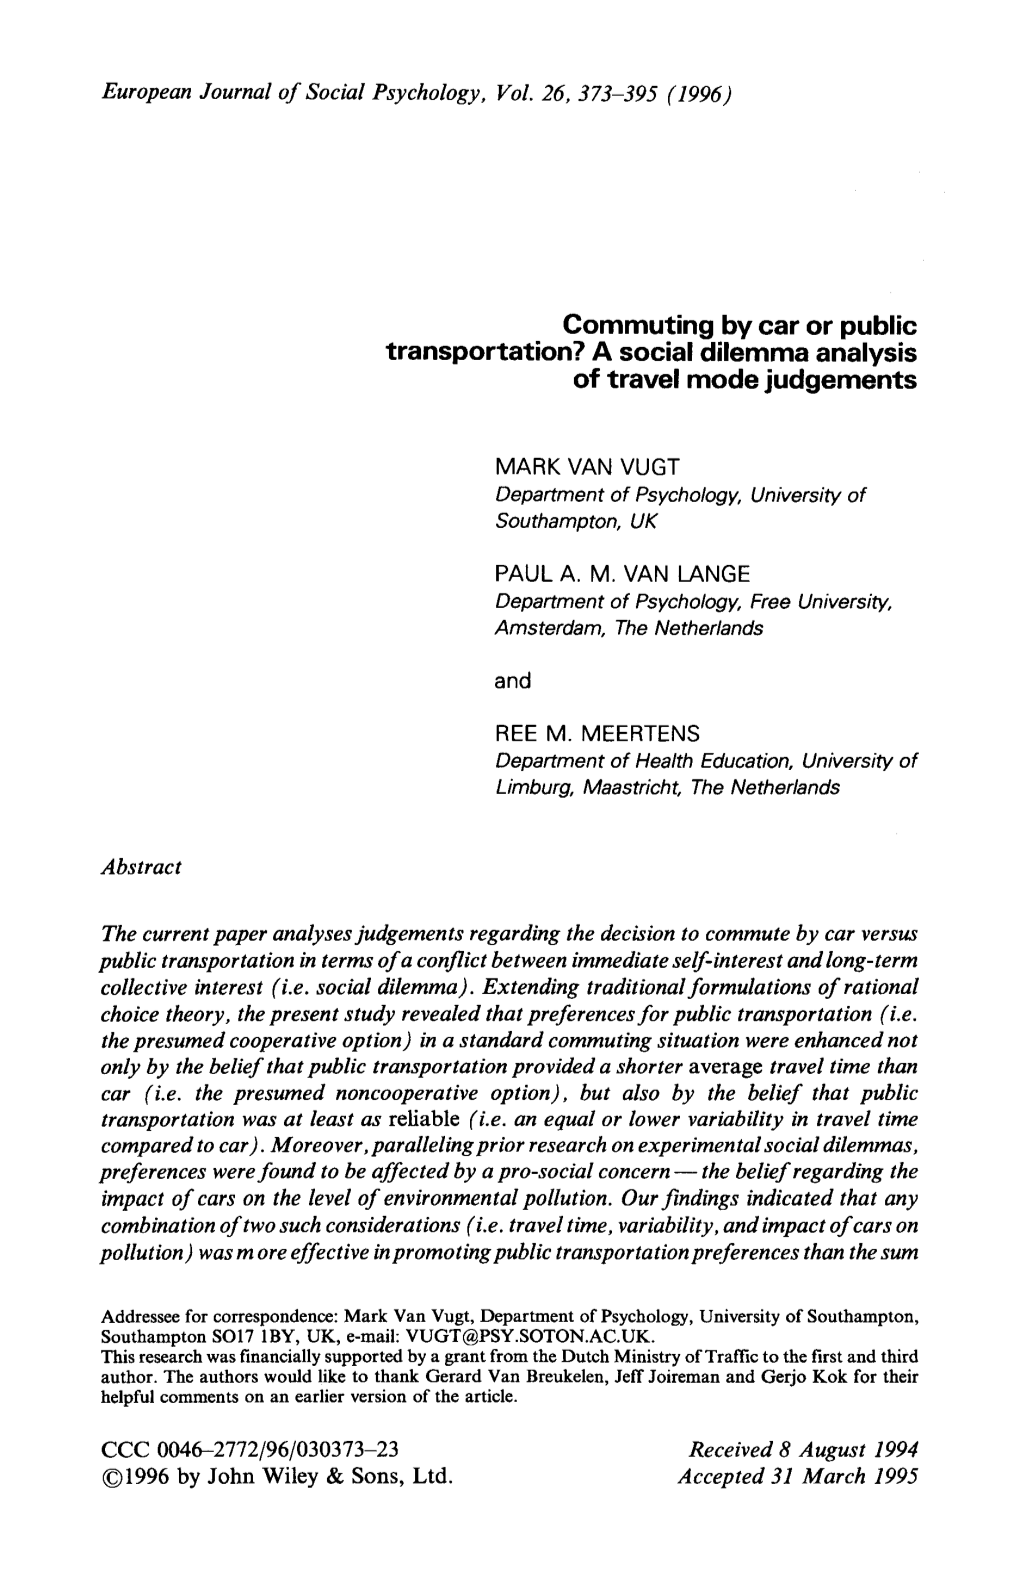 Commuting by Car Or Public Transportation?A Social Dilemma Analysis of Travel Mode Judgements